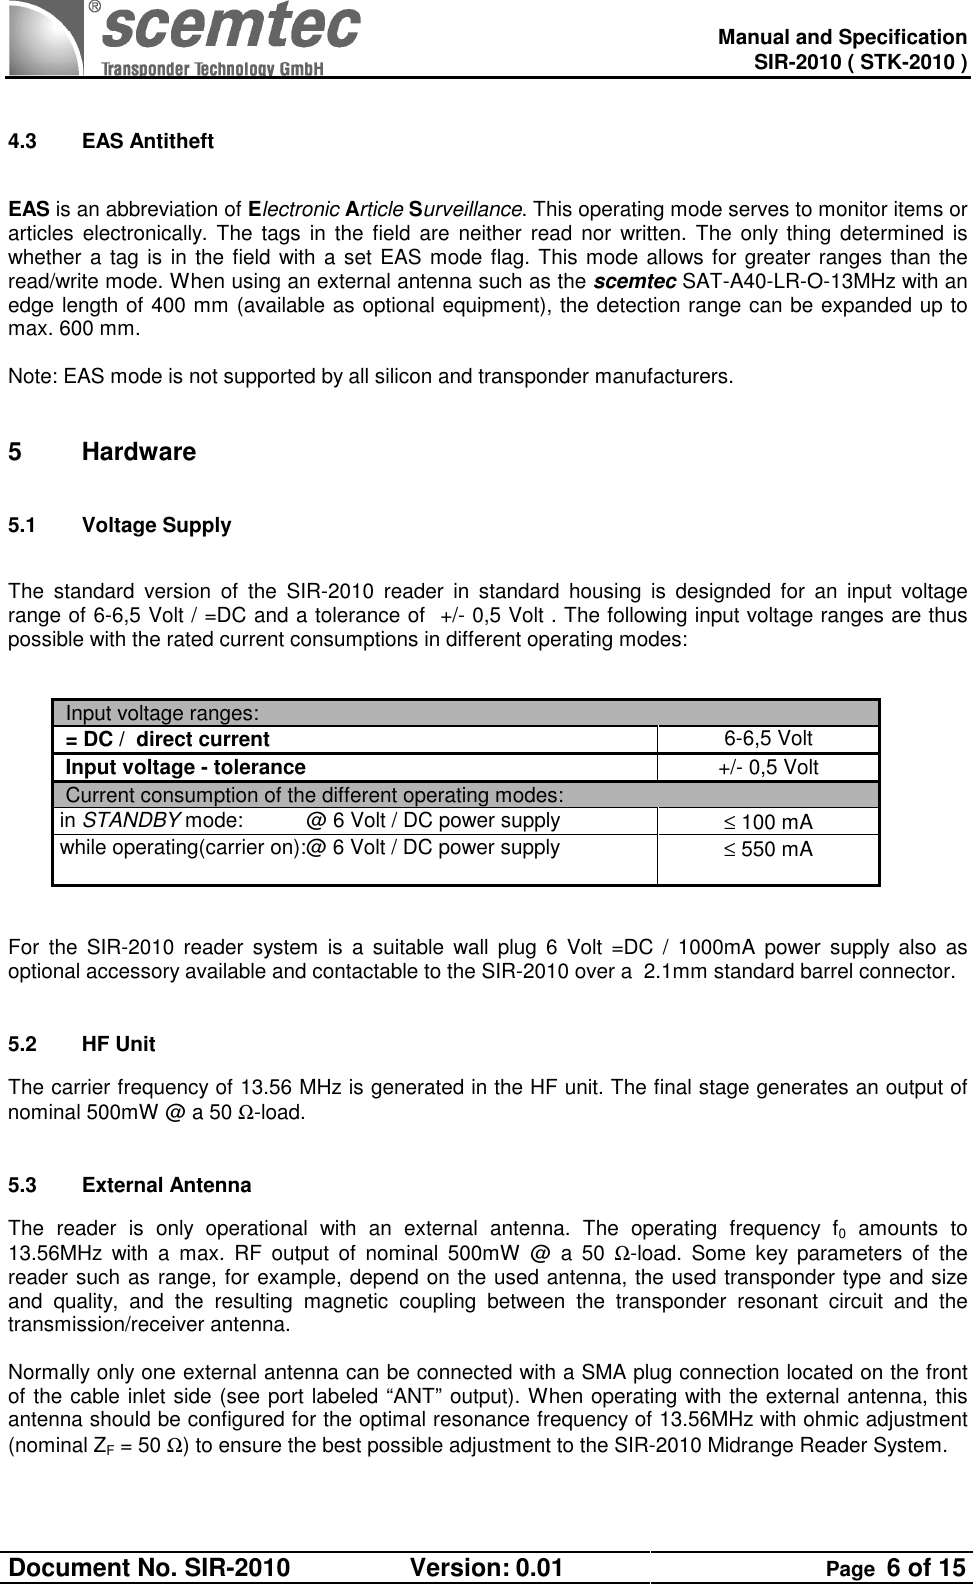   Manual and Specification SIR-2010 ( STK-2010 ) Document No. SIR-2010  Version: 0.01  Page  6 of 15   4.3  EAS Antitheft  EAS is an abbreviation of Electronic Article Surveillance. This operating mode serves to monitor items or articles electronically. The  tags  in  the  field  are  neither read  nor  written. The only thing determined is whether a tag is in the field with a set EAS mode flag. This mode allows for greater ranges than the read/write mode. When using an external antenna such as the scemtec SAT-A40-LR-O-13MHz with an edge length of 400 mm (available as optional equipment), the detection range can be expanded up to max. 600 mm.   Note: EAS mode is not supported by all silicon and transponder manufacturers.  5  Hardware 5.1  Voltage Supply   The  standard  version  of  the  SIR-2010  reader  in  standard  housing  is  designded  for  an  input  voltage range of 6-6,5 Volt / =DC and a tolerance of  +/- 0,5 Volt . The following input voltage ranges are thus possible with the rated current consumptions in different operating modes:    Input voltage ranges:  = DC /  direct current 6-6,5 Volt  Input voltage - tolerance +/- 0,5 Volt  Current consumption of the different operating modes:   in STANDBY mode:           @ 6 Volt / DC power supply  ≤ 100 mA while operating(carrier on):@ 6 Volt / DC power supply                              ≤ 550 mA    For  the  SIR-2010  reader  system  is  a  suitable  wall  plug  6  Volt  =DC  /  1000mA  power  supply also  as optional accessory available and contactable to the SIR-2010 over a  2.1mm standard barrel connector.  5.2  HF Unit The carrier frequency of 13.56 MHz is generated in the HF unit. The final stage generates an output of nominal 500mW @ a 50 Ω-load.  5.3  External Antenna The  reader  is  only  operational  with  an  external  antenna.  The  operating  frequency  f0  amounts  to 13.56MHz  with  a  max.  RF  output  of  nominal  500mW  @  a  50  Ω-load.  Some  key  parameters  of  the reader such as range, for example, depend on the used antenna, the used transponder type and size and  quality,  and  the  resulting  magnetic  coupling  between  the  transponder  resonant  circuit  and  the transmission/receiver antenna.  Normally only one external antenna can be connected with a SMA plug connection located on the front of the cable inlet side (see port labeled “ANT” output). When operating with the external antenna, this antenna should be configured for the optimal resonance frequency of 13.56MHz with ohmic adjustment (nominal ZF = 50 Ω) to ensure the best possible adjustment to the SIR-2010 Midrange Reader System.  